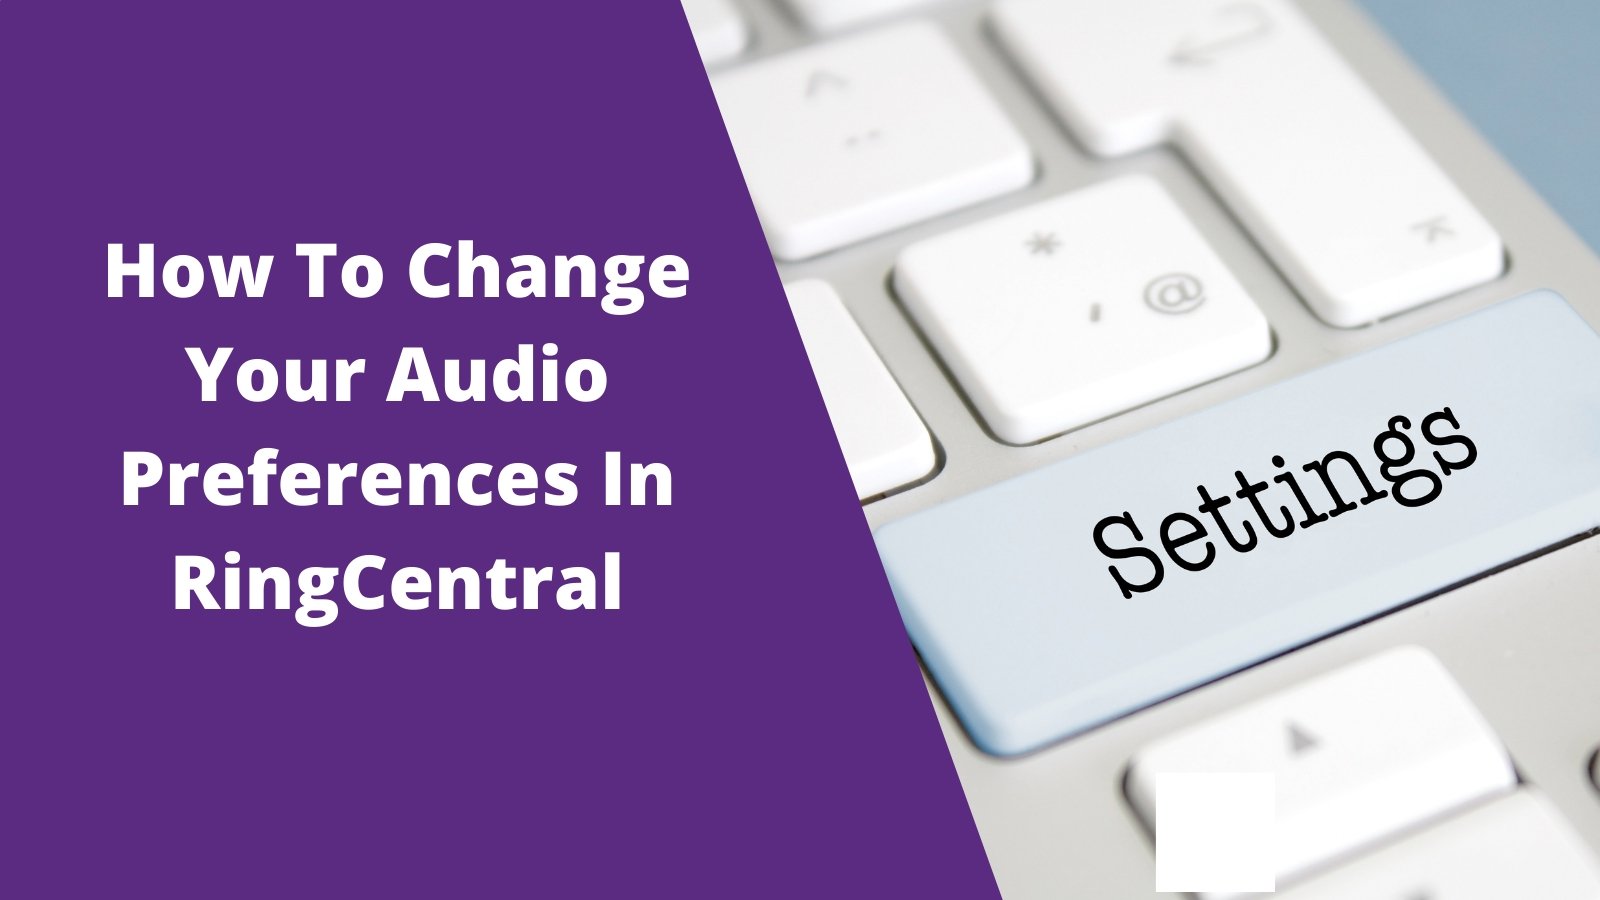 How To Change Your Audio Preferences In RingCentral - Headset Advisor